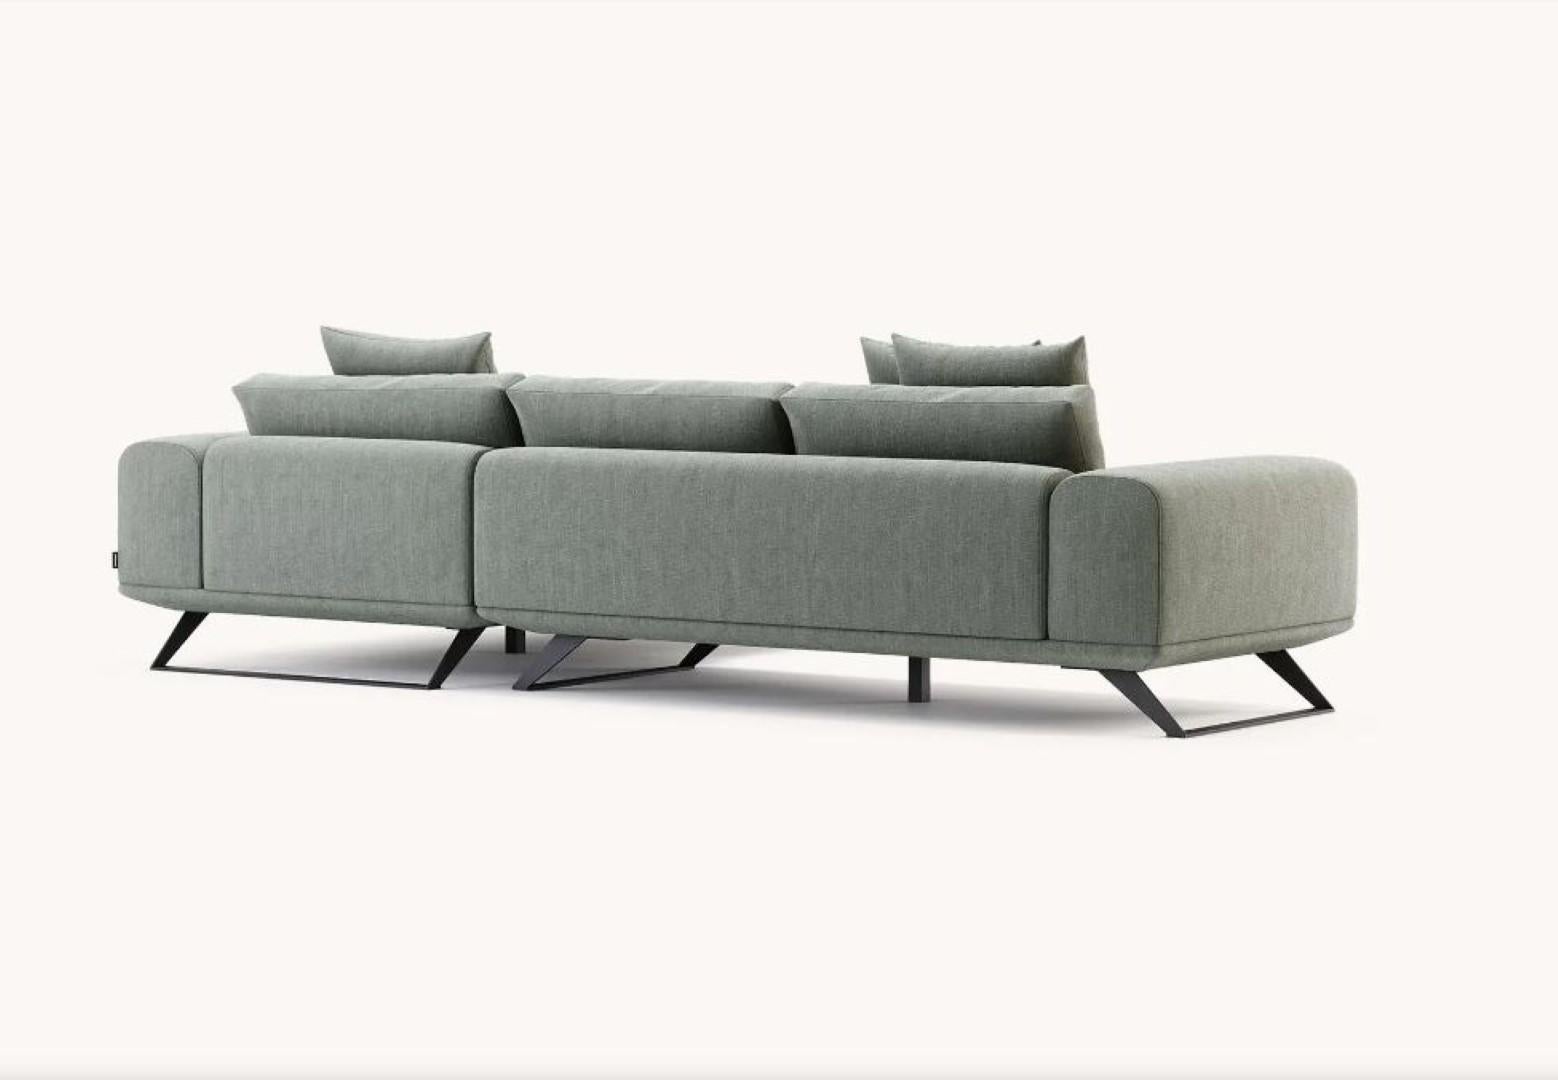 Portuguese Aniston Chaise Sofa by Domkapa For Sale